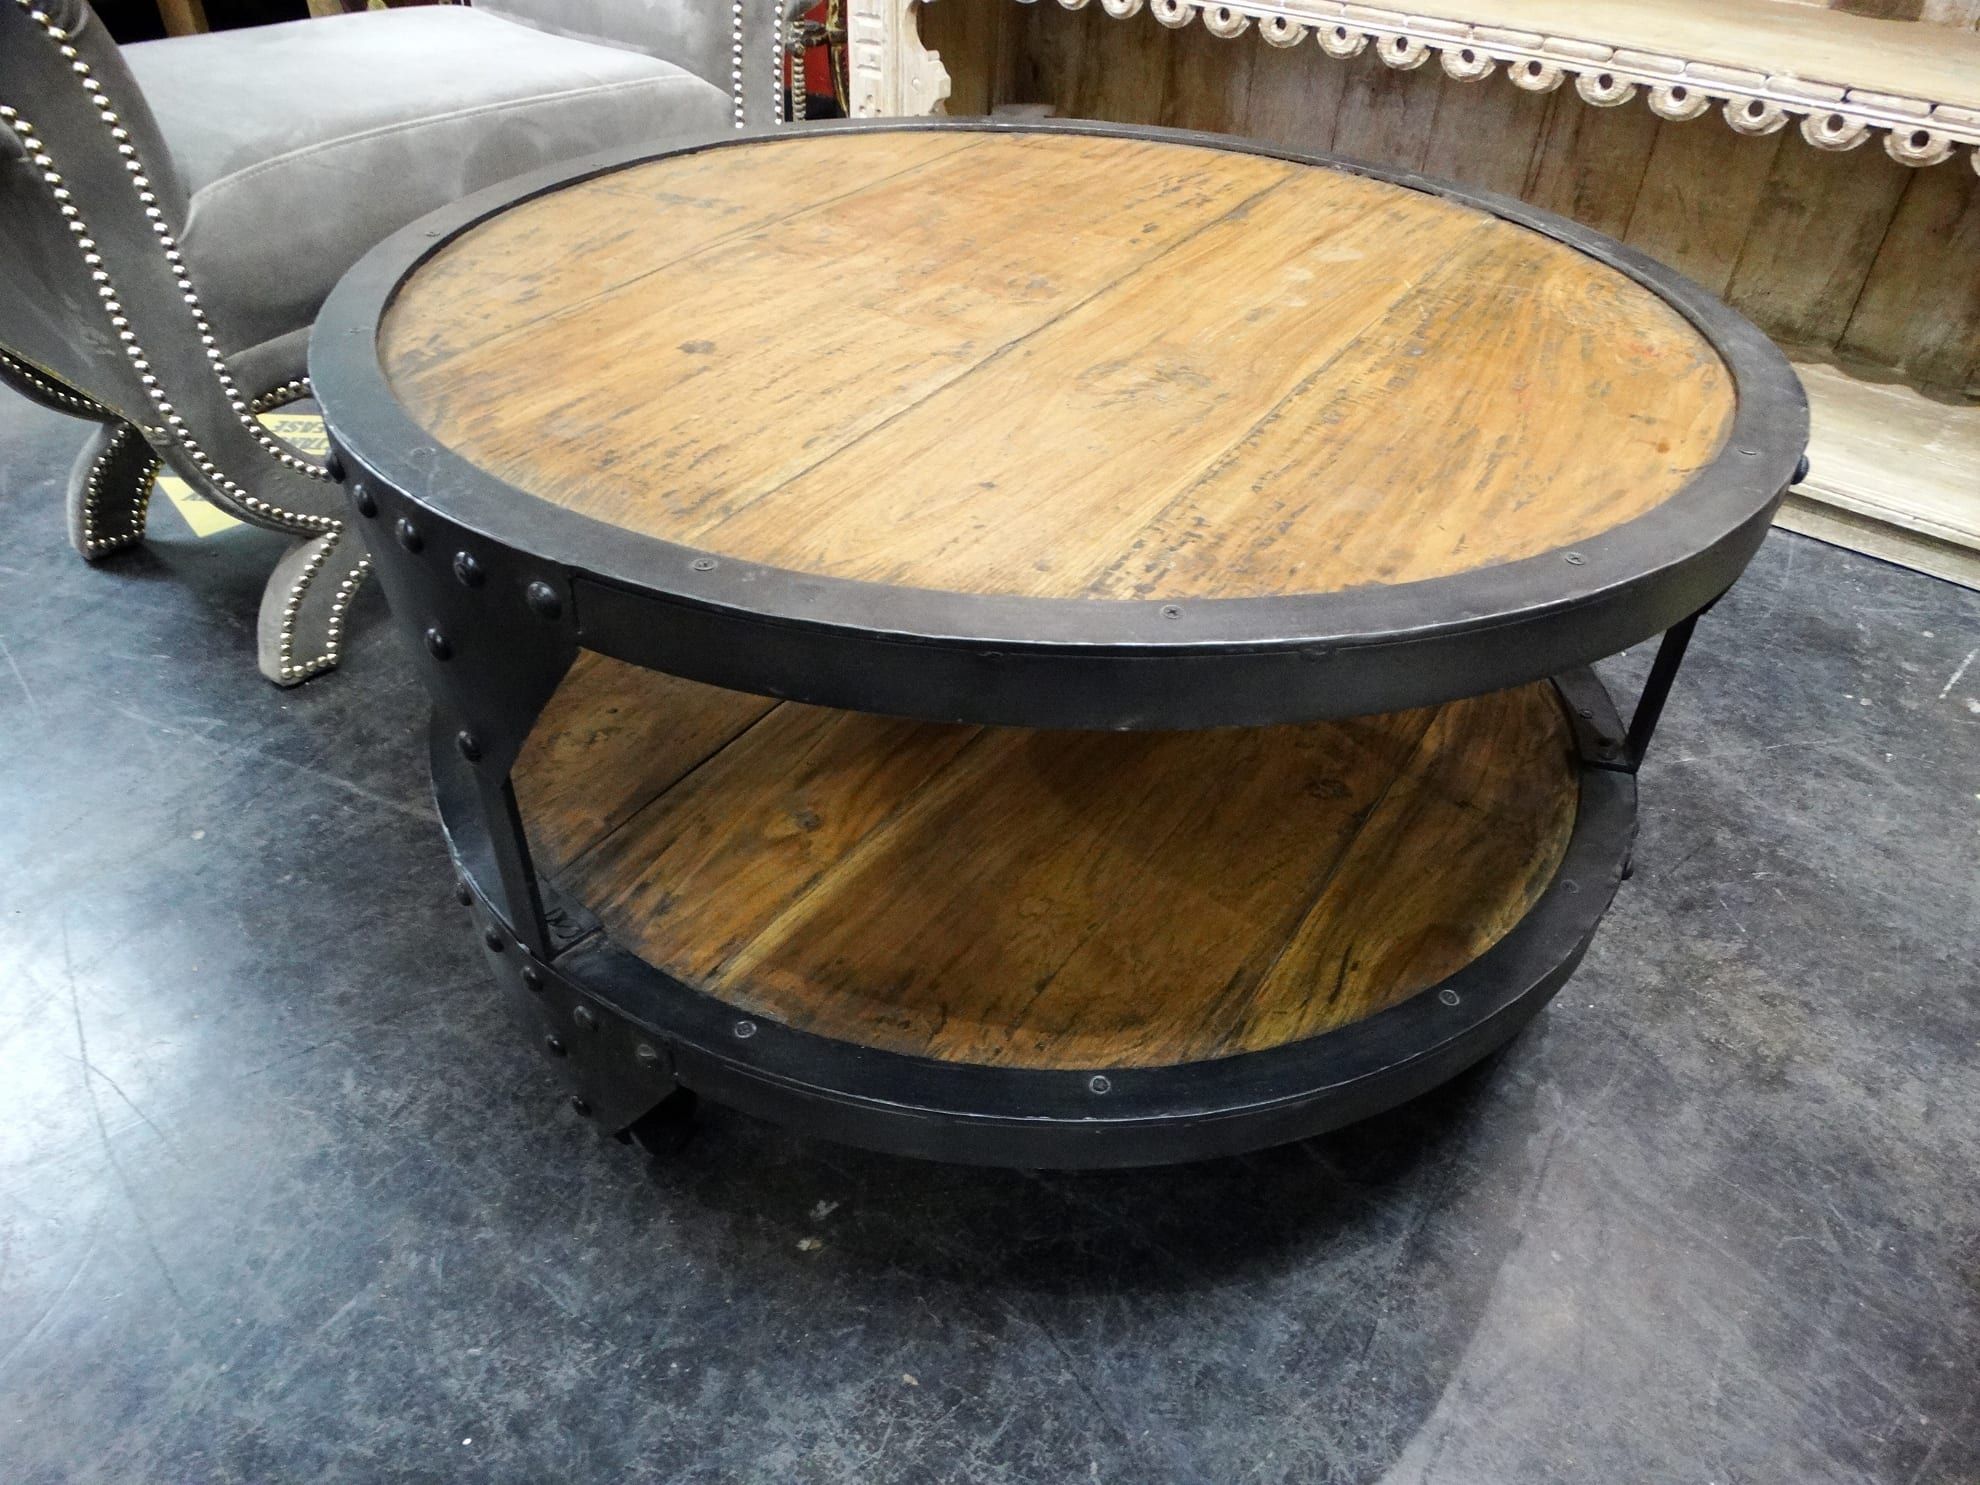 Rustic Industrial Round Coffee Table Pertaining To Round Industrial Coffee Tables (View 4 of 20)